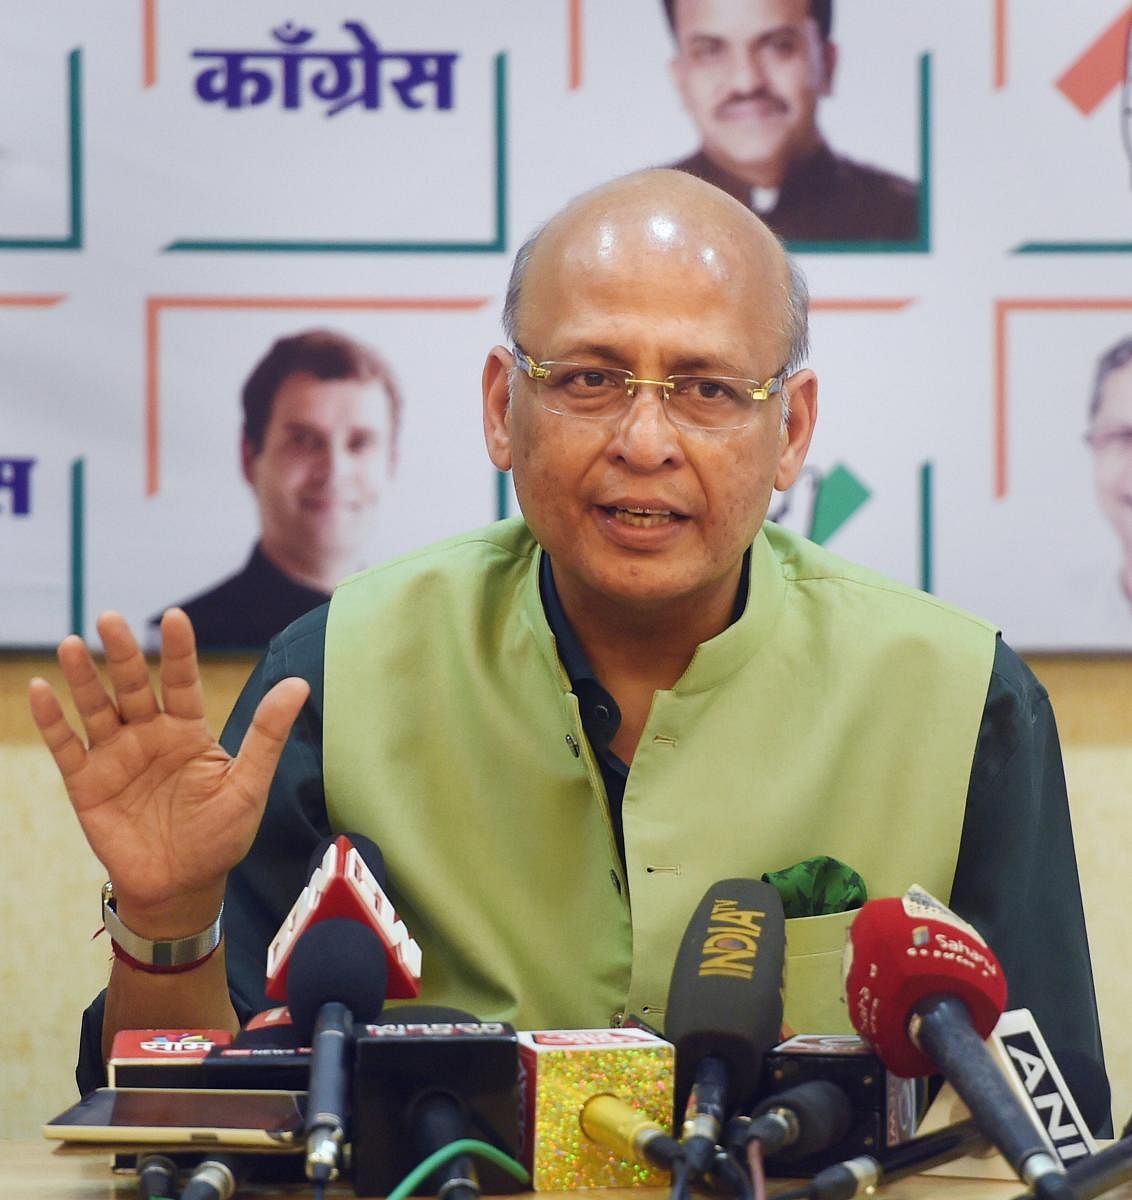 Accusing the government of repeatedly displaying "intrusive and nosy behaviour", Congress spokesperson Abhishek Singhvi said the BJP-led government wants "an India that is defined by them". (PTI Photo)